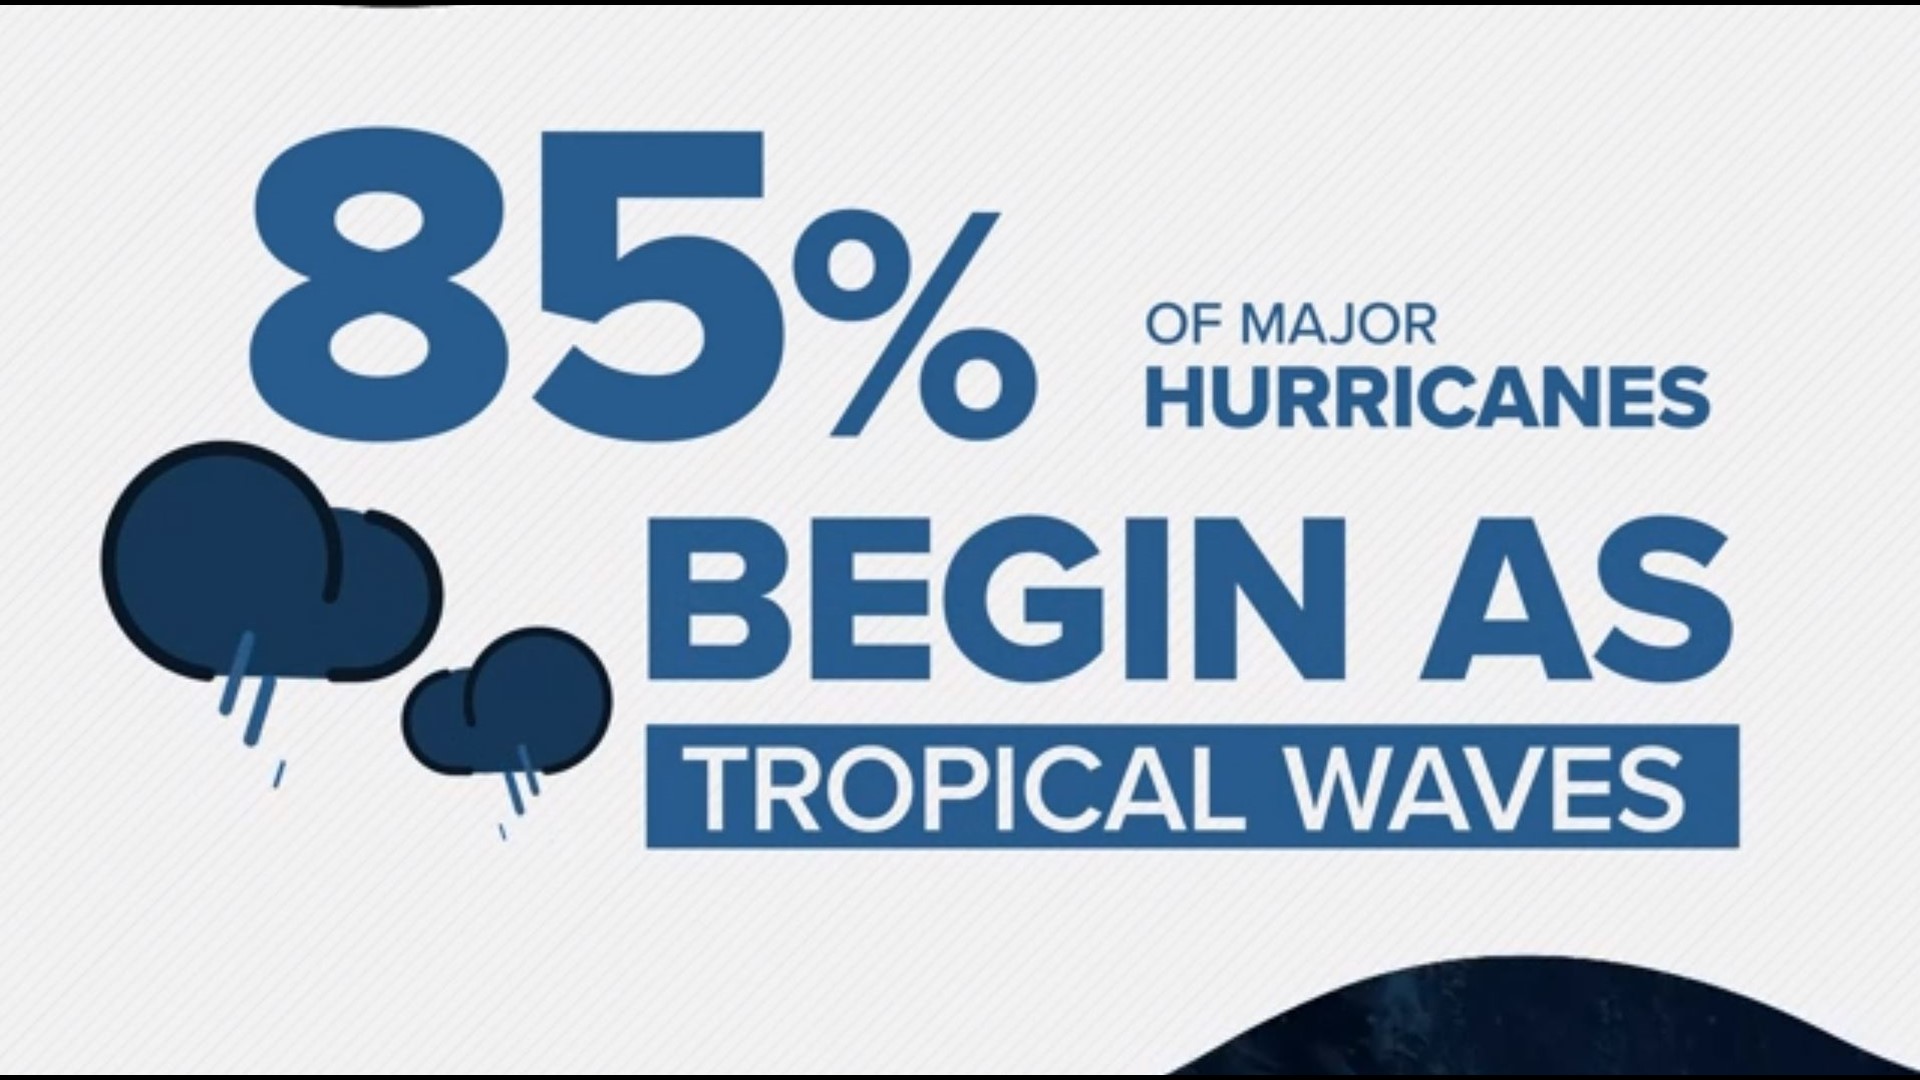 You hear about "the tropics". What does this mean, weather-wise?